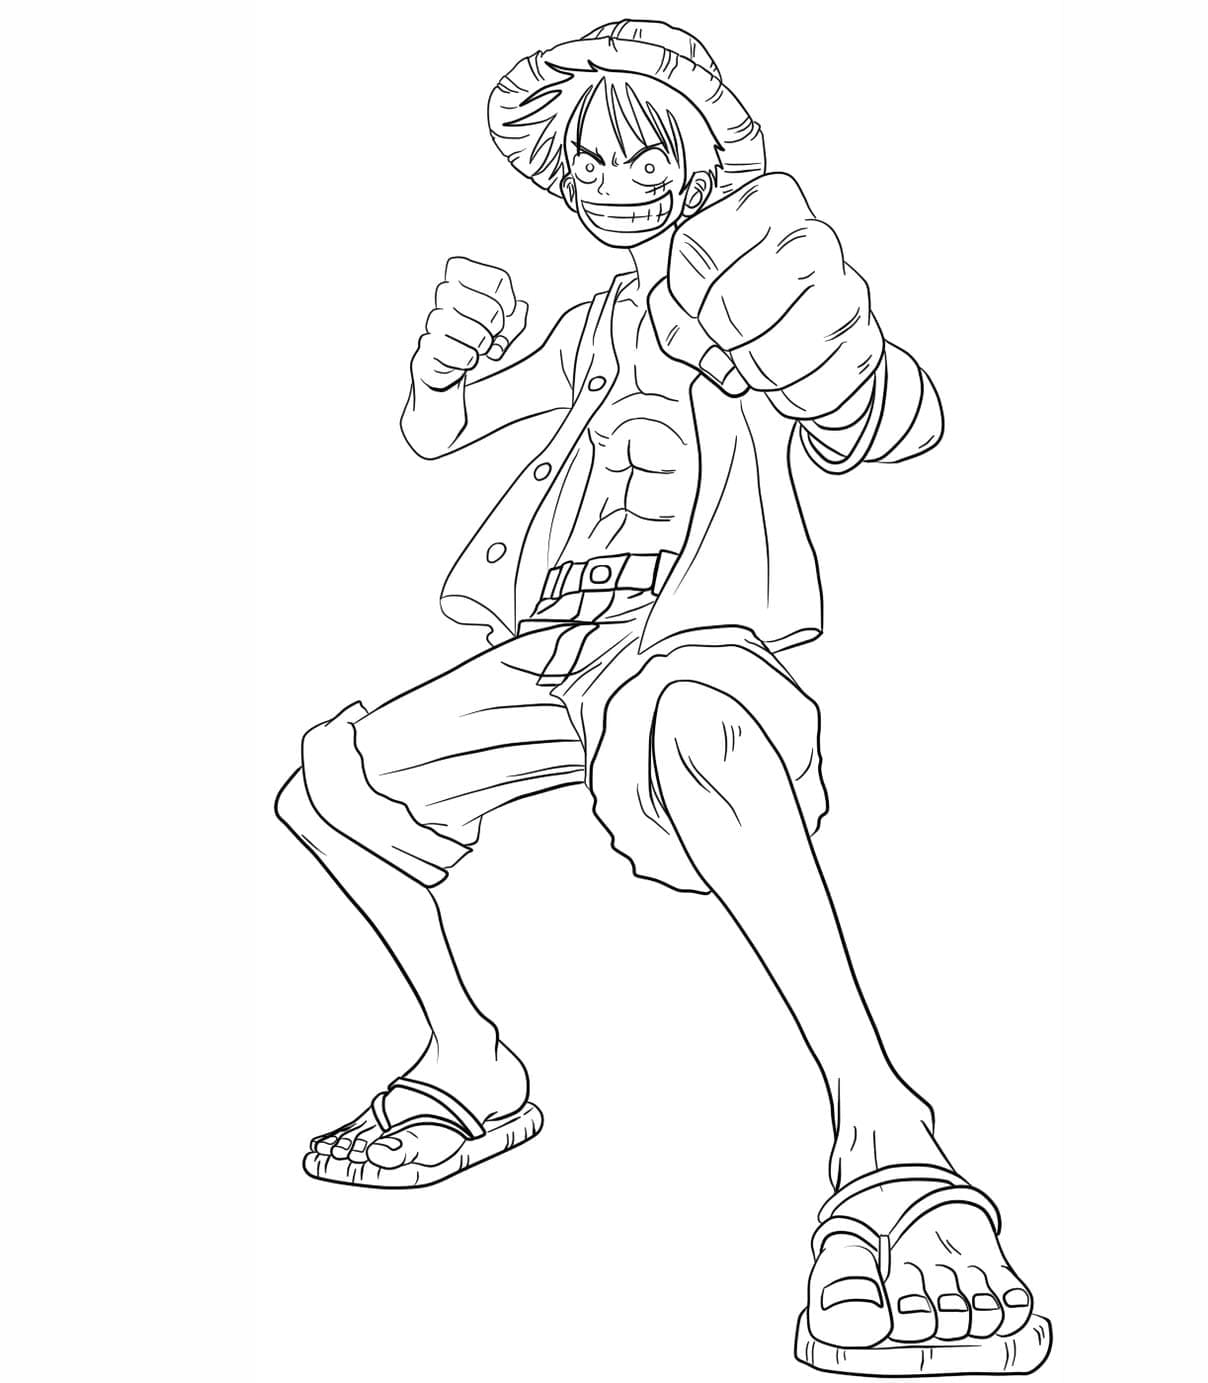 Coloriage Luffy dans l'anime One Piece